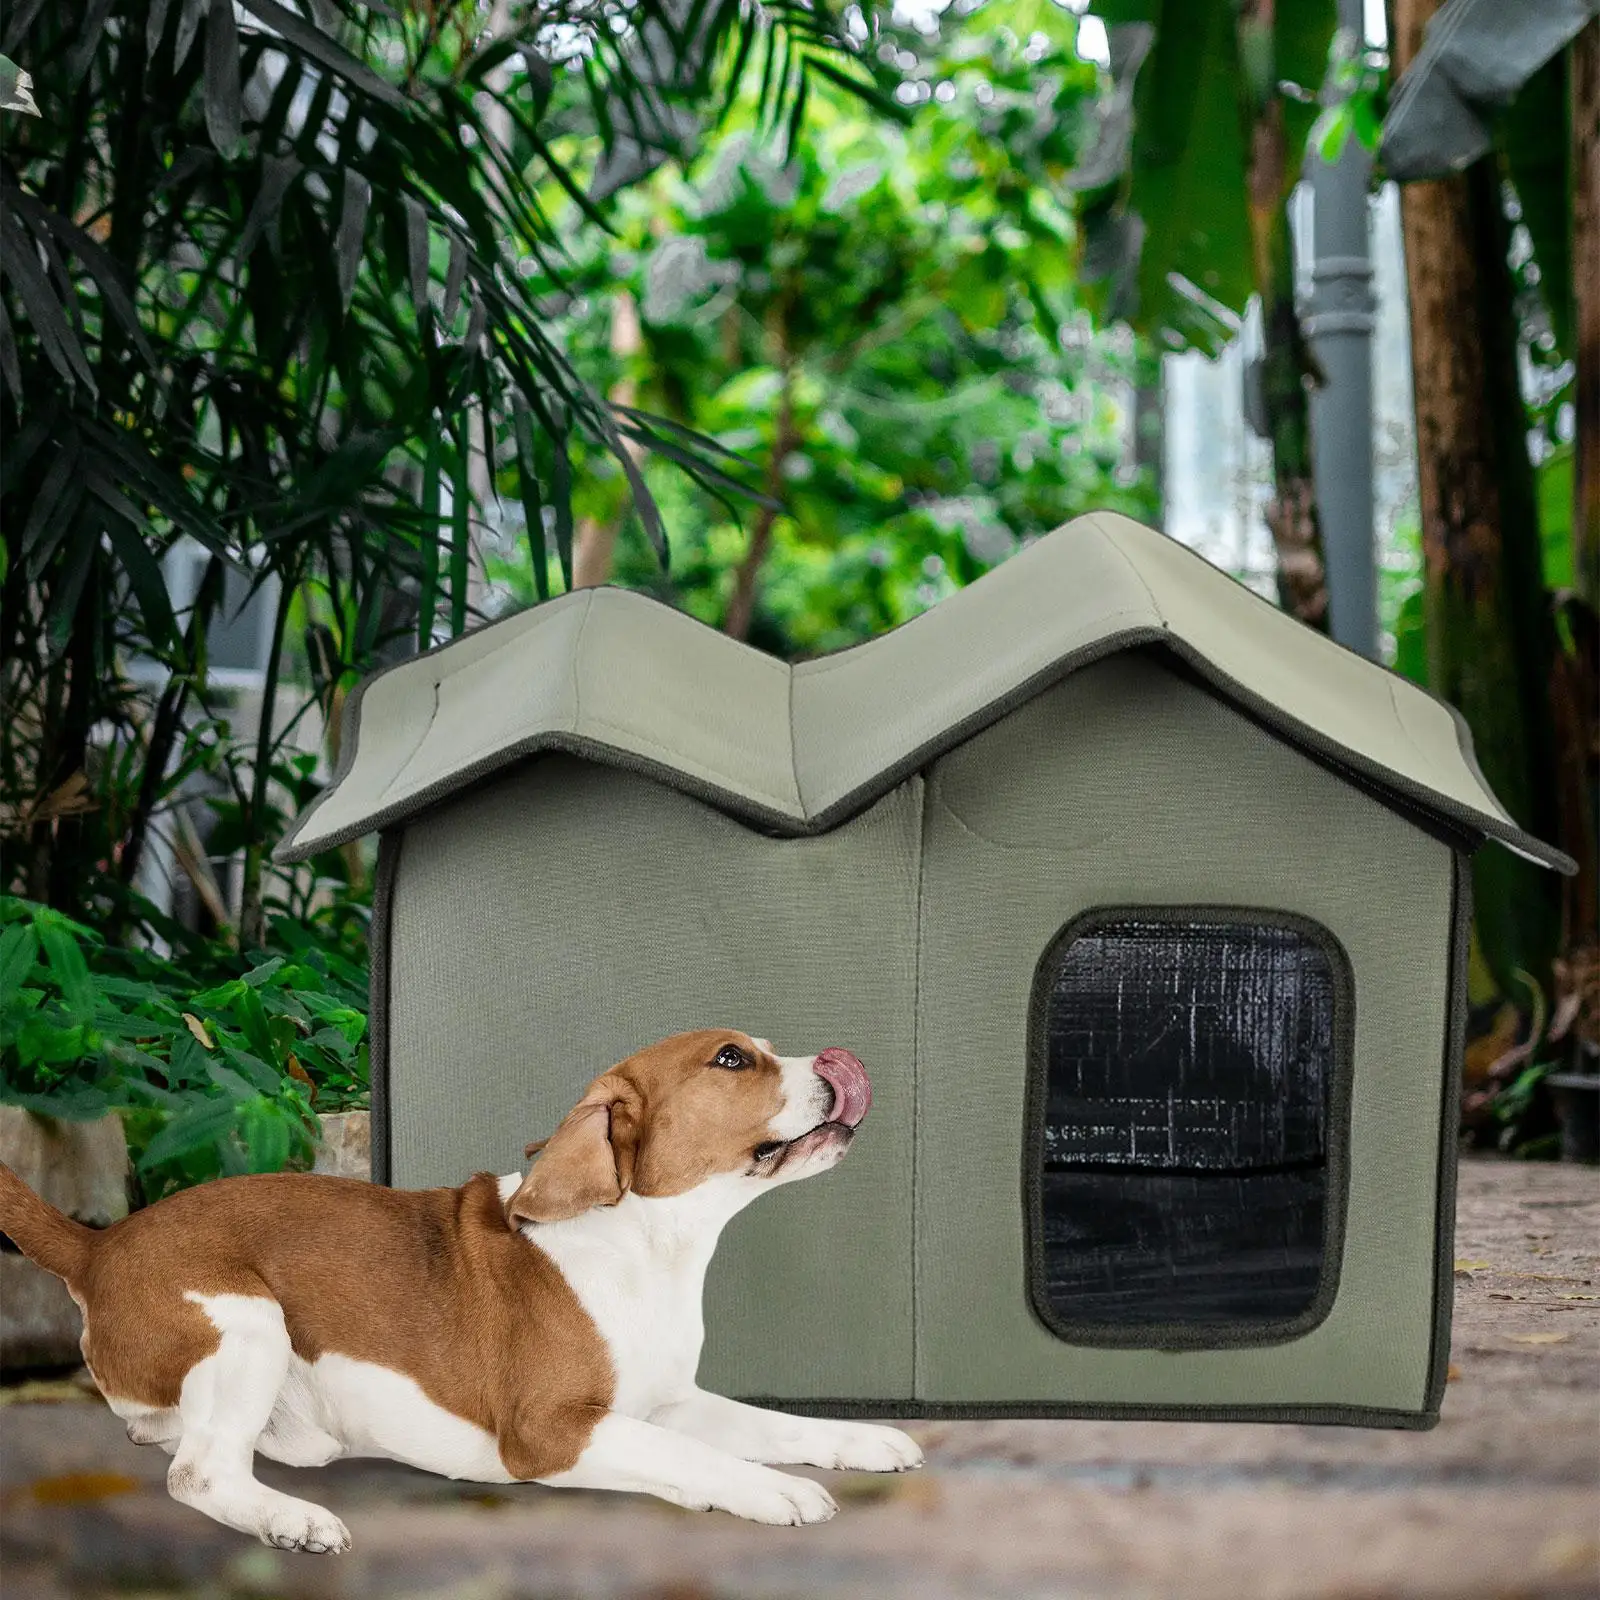 Dog House Weatherproof Waterproof Oxford Cloth Rainproof Pet Shelter for Courtyard Puppy Cats and Small Dogs Indoor Home